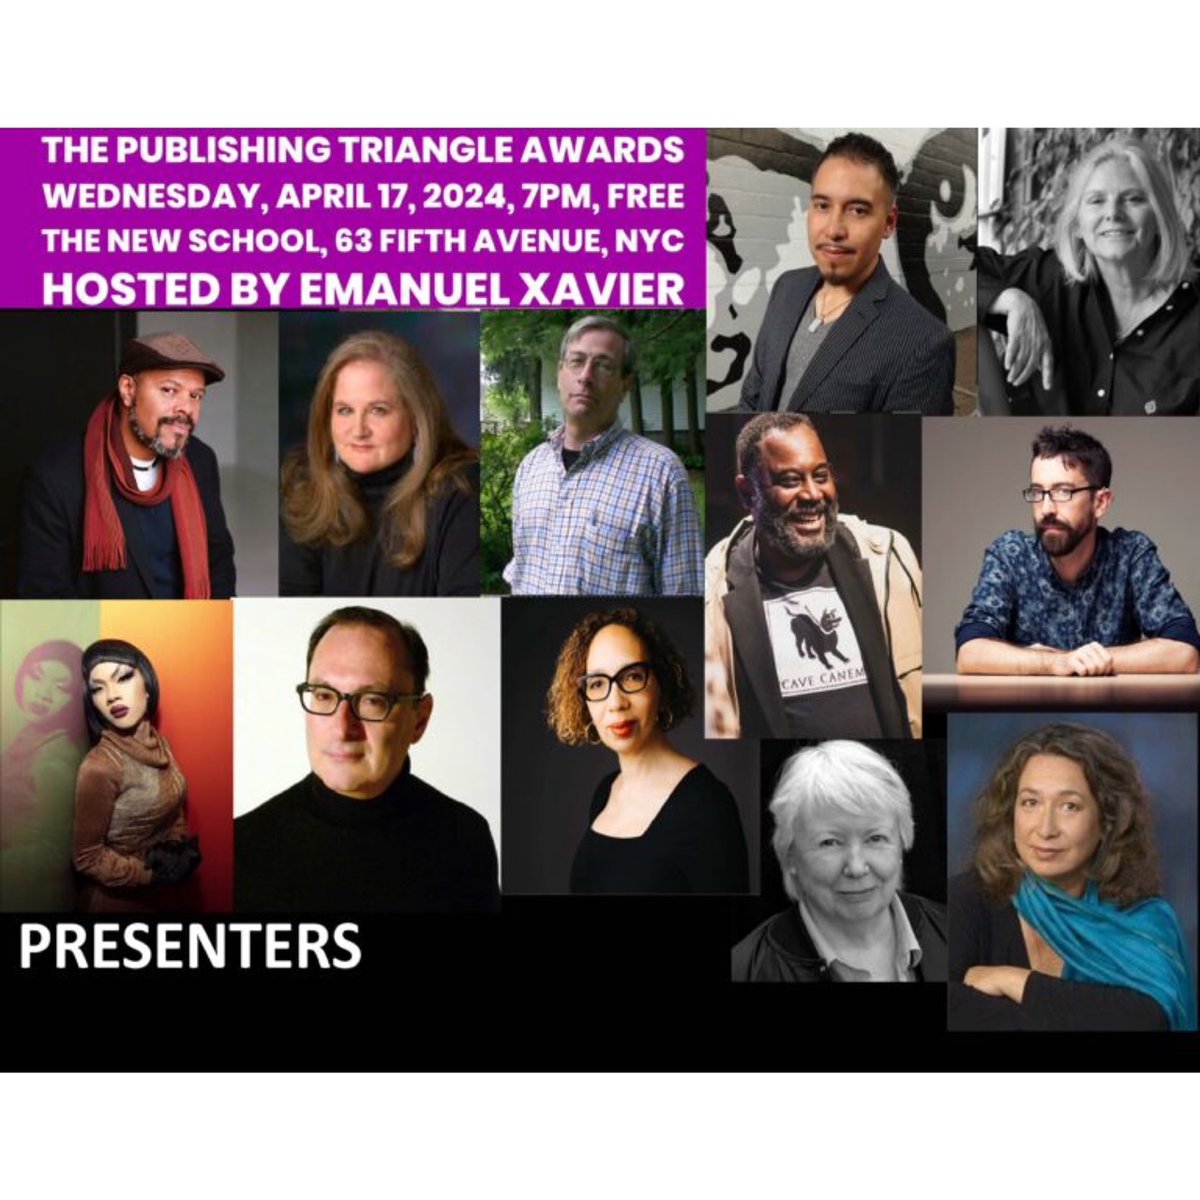 Don't forget to register for our FREE awards ceremony happening this Wednesday, April 17 at 7pm at @TheNewSchool - 63 Fifth Ave, NYC. Register here: eventbrite.com/e/publishing-t…